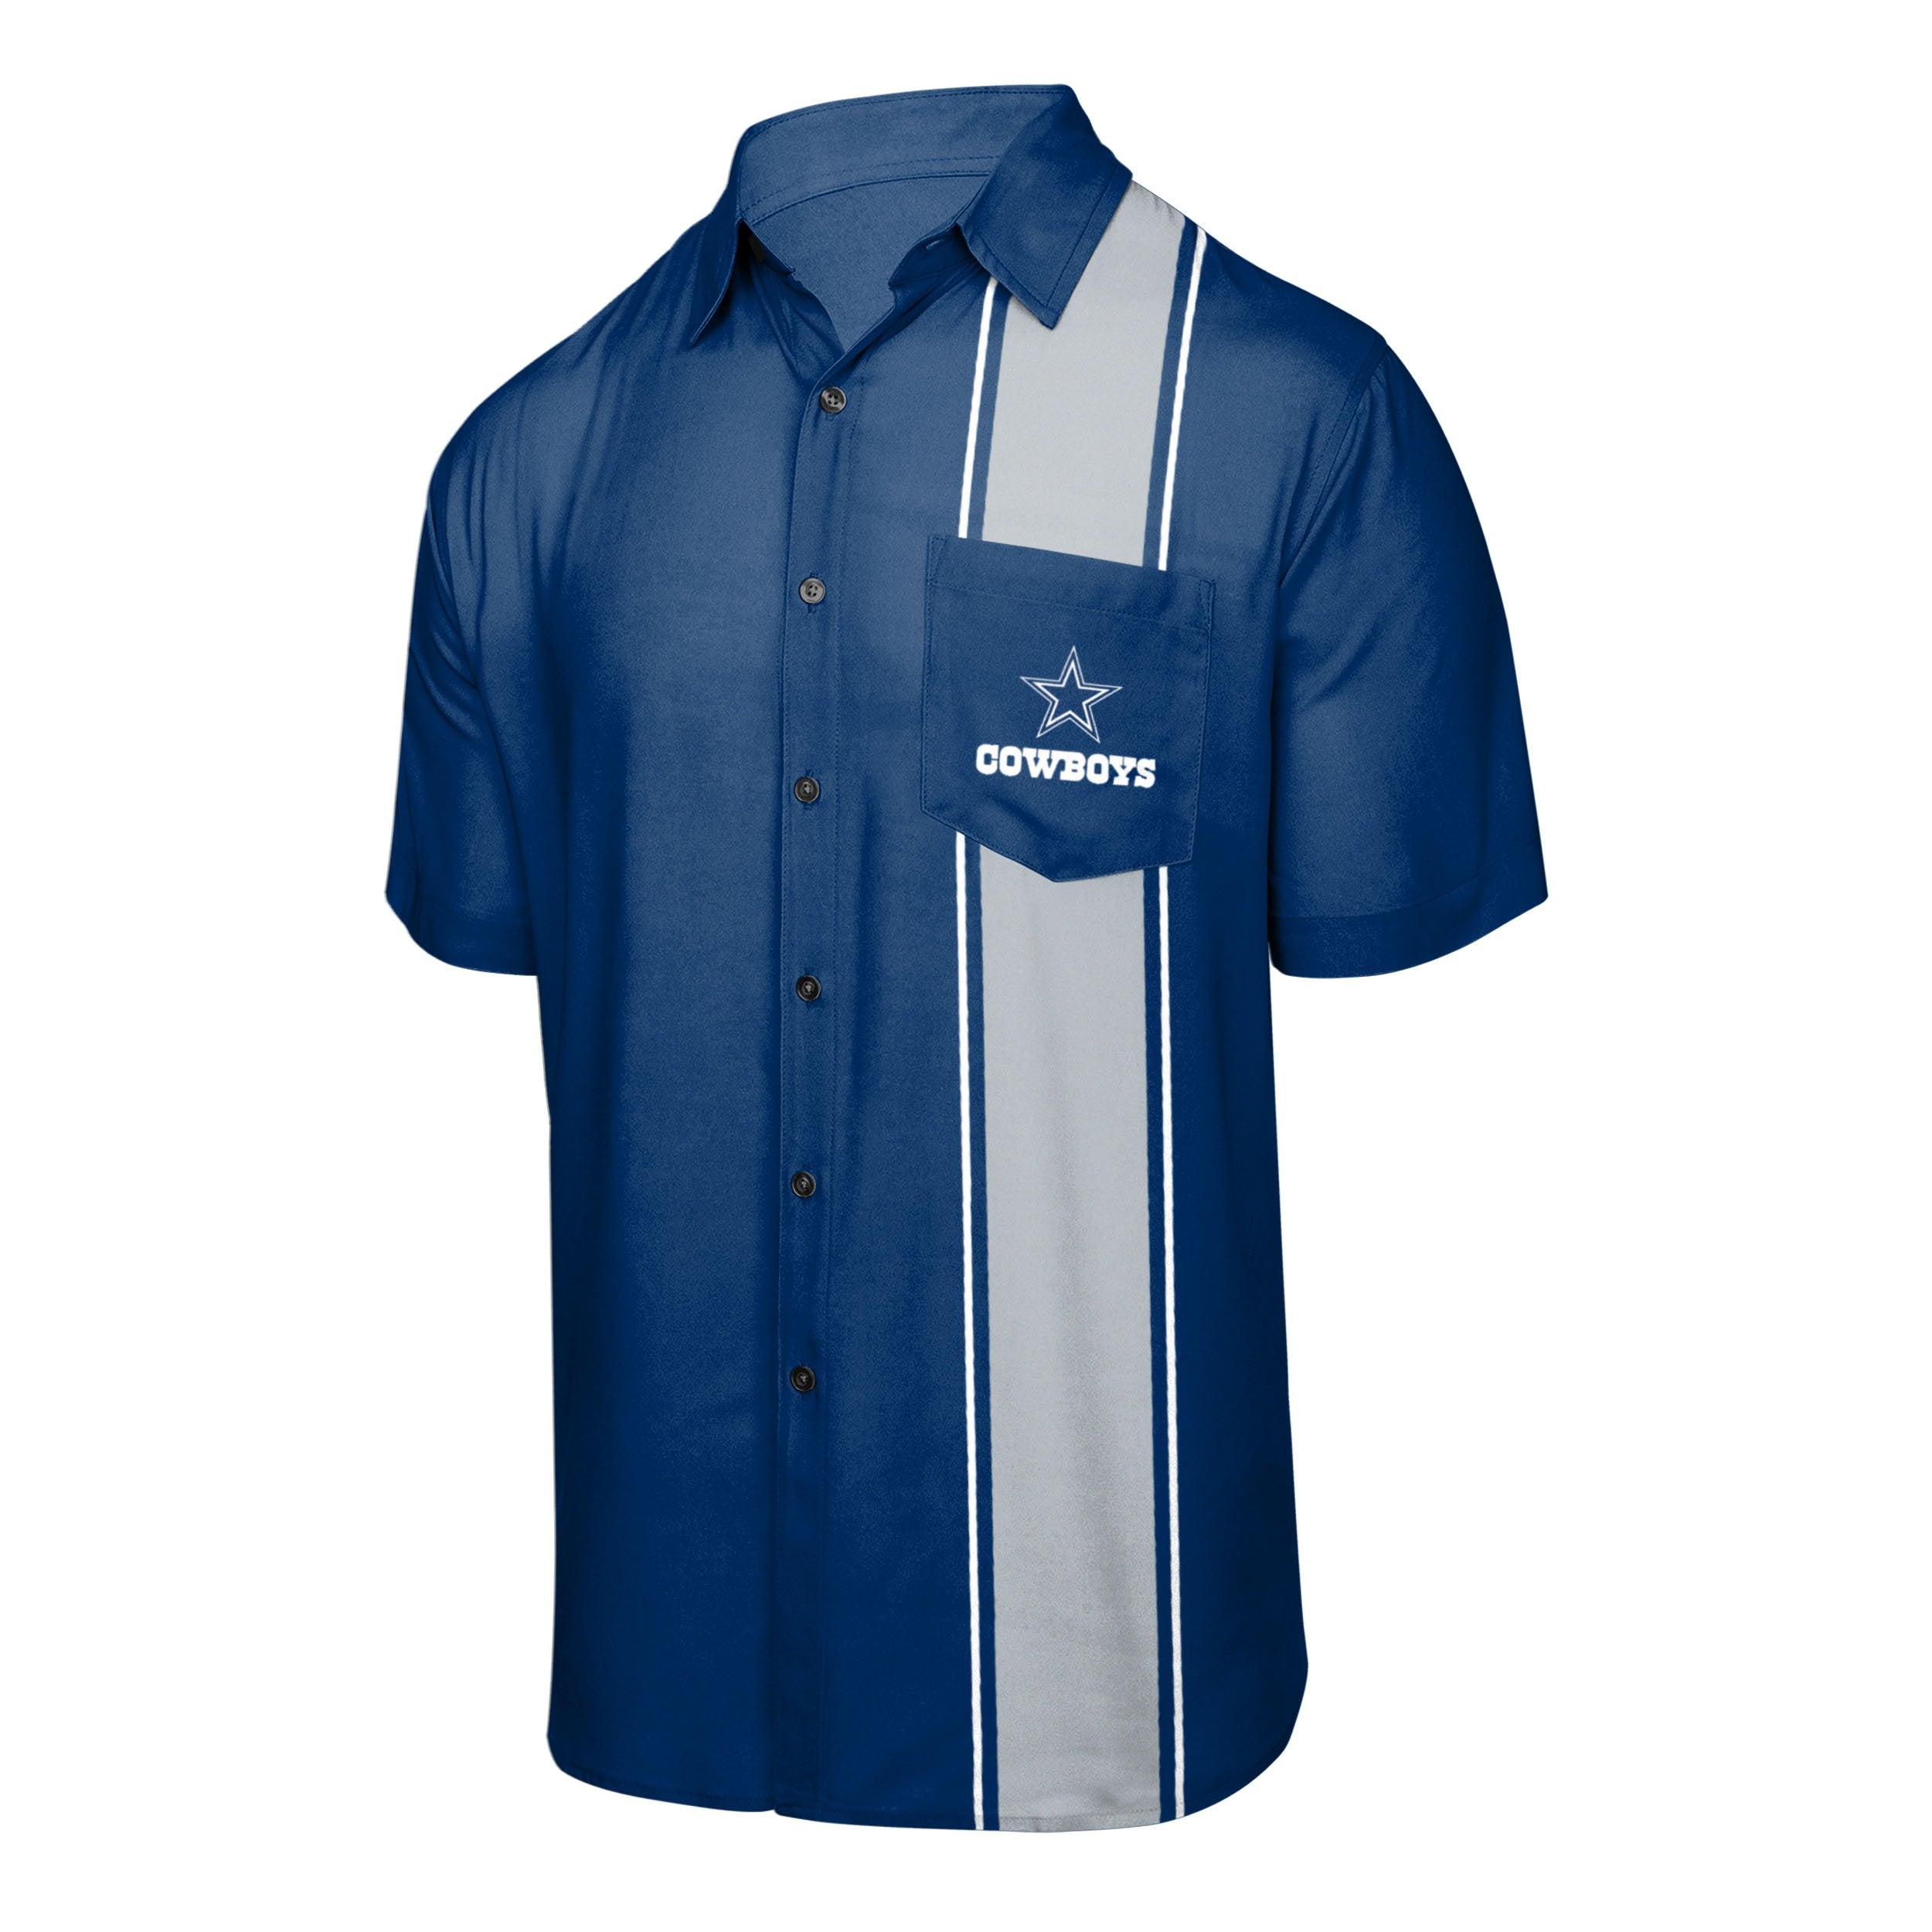 cowboys button up jersey